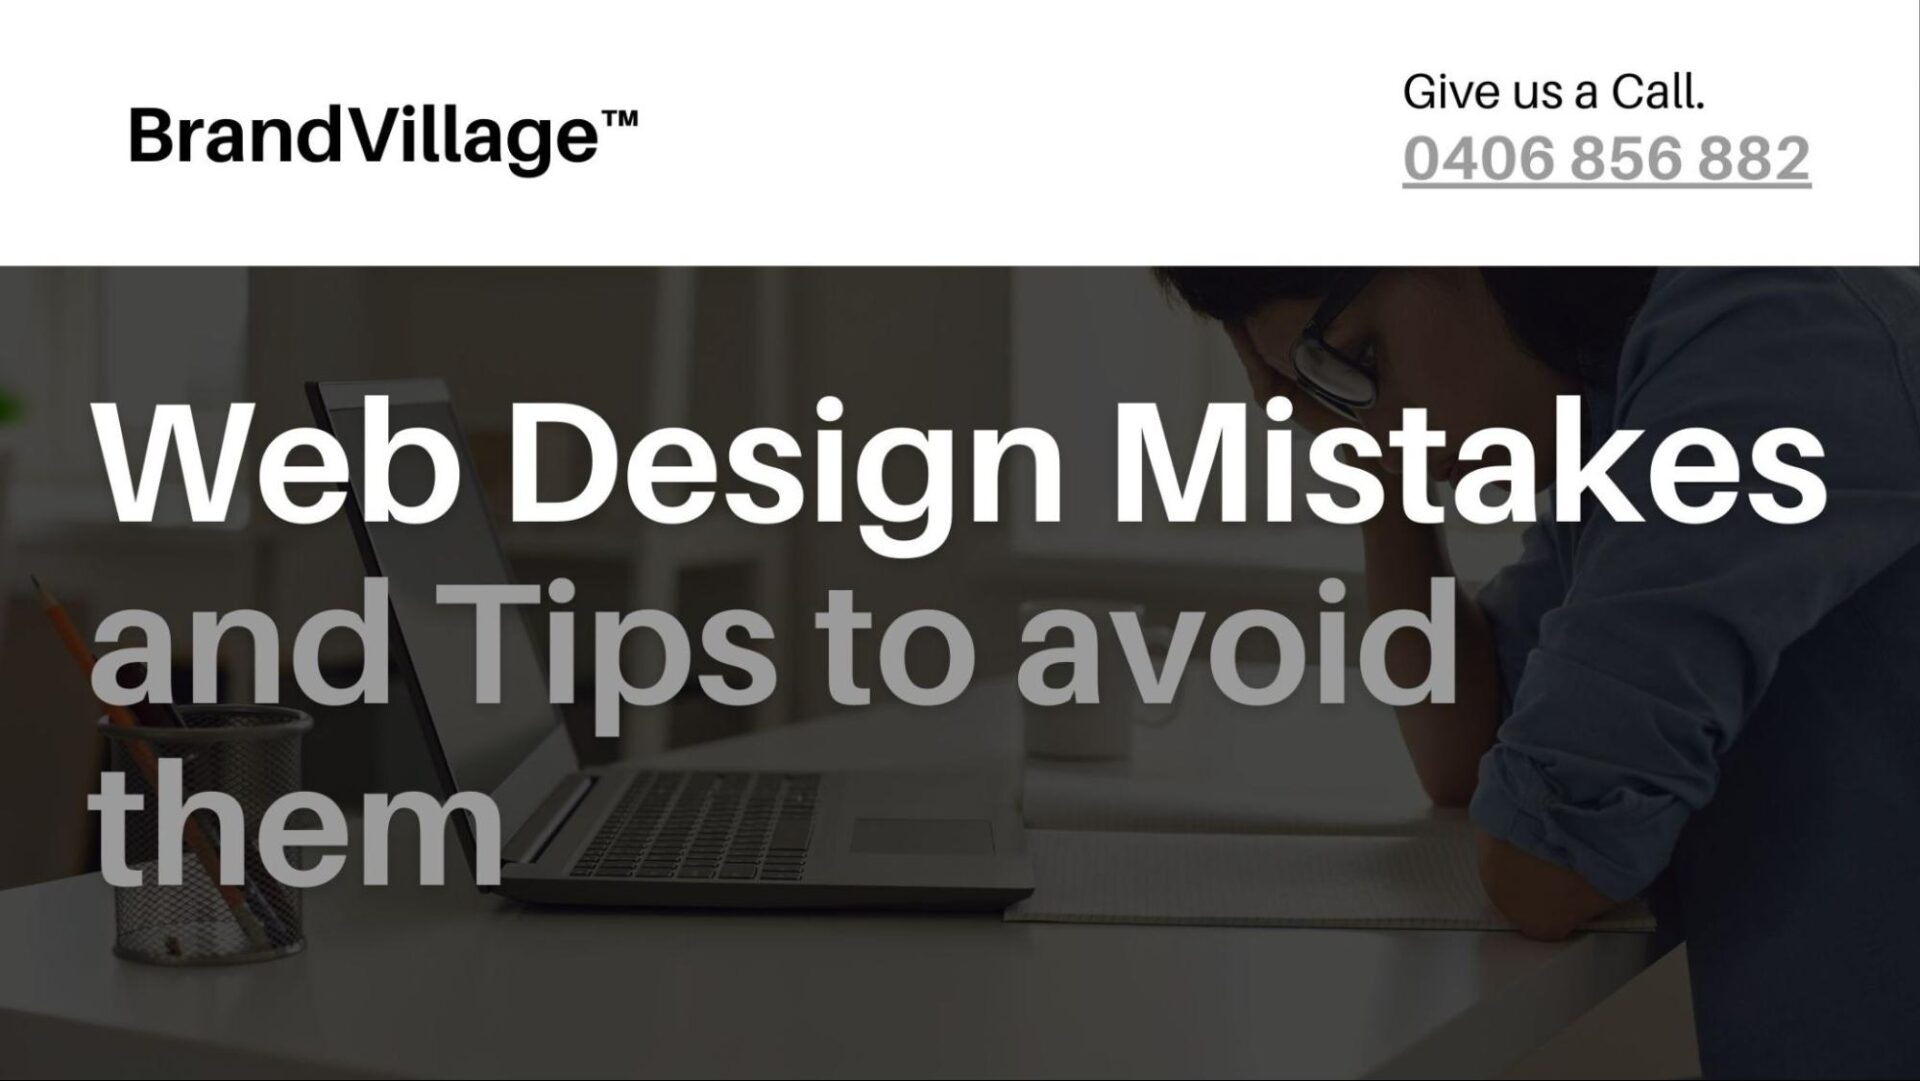 Web Design Mistakes and Tips to Avoid Them